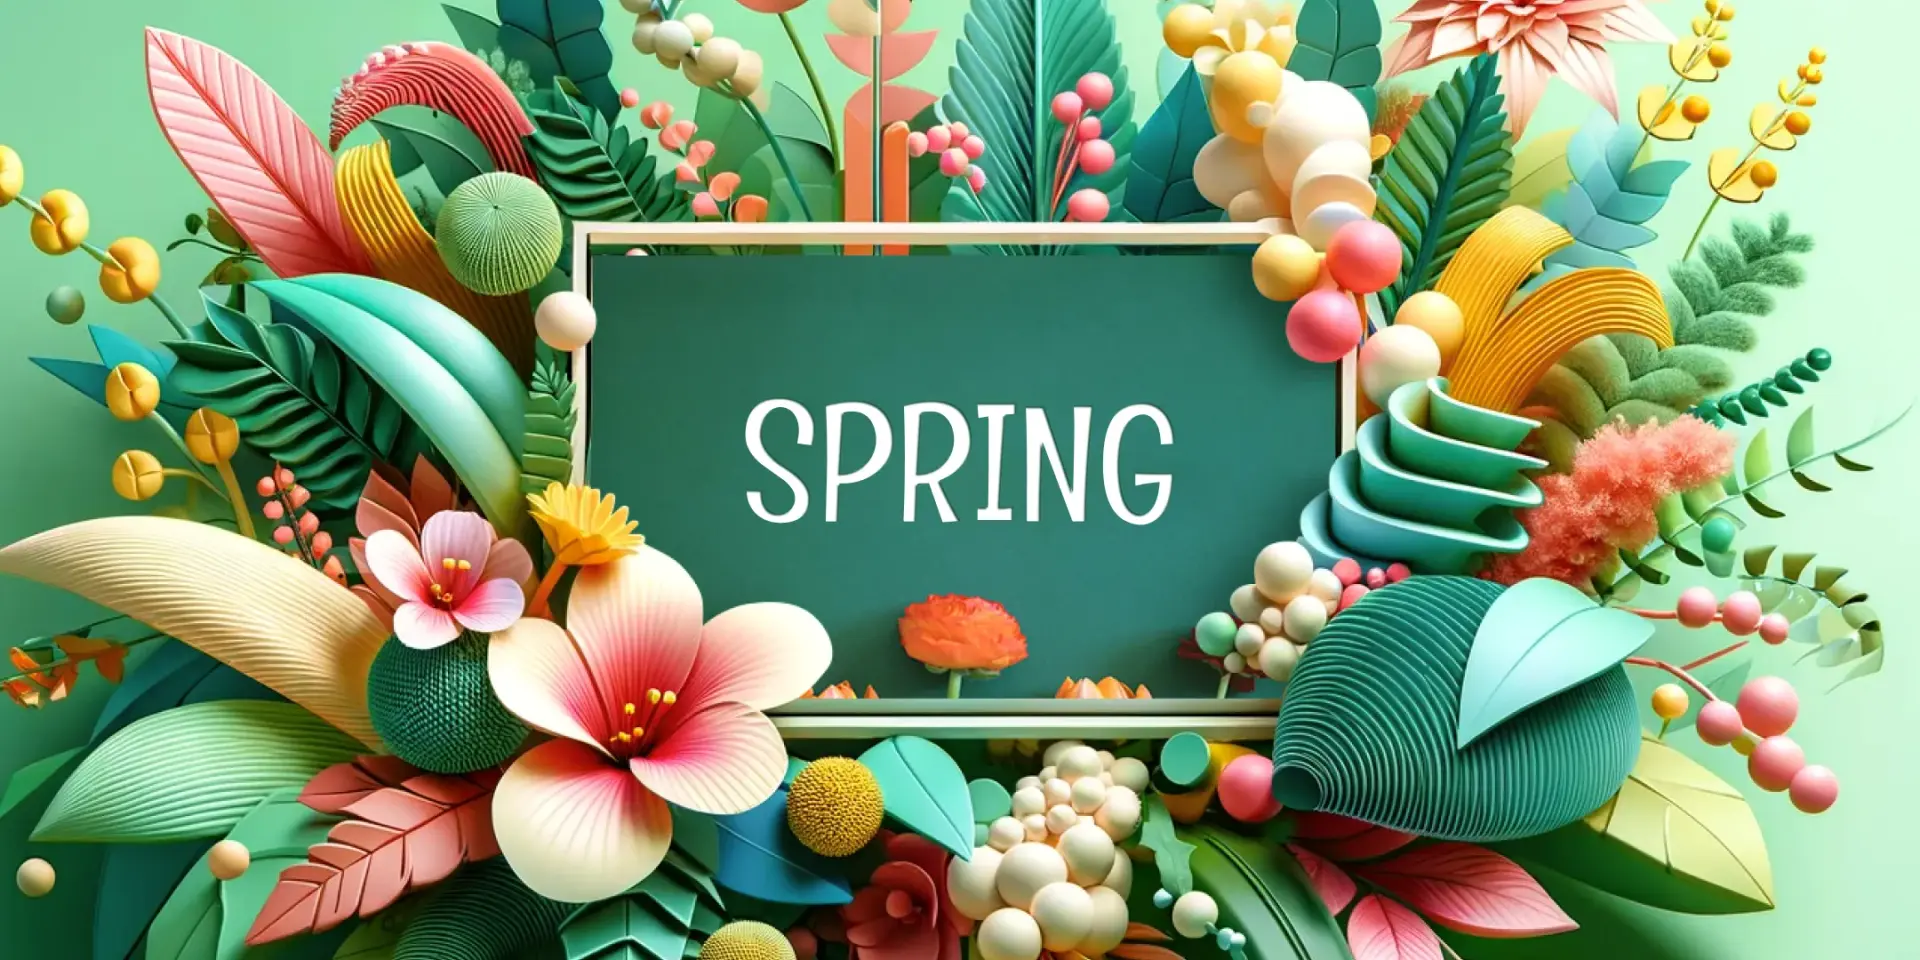 The word "SPRING" on a green background, framed by an explosion of gorgeous 3D flower illustrations